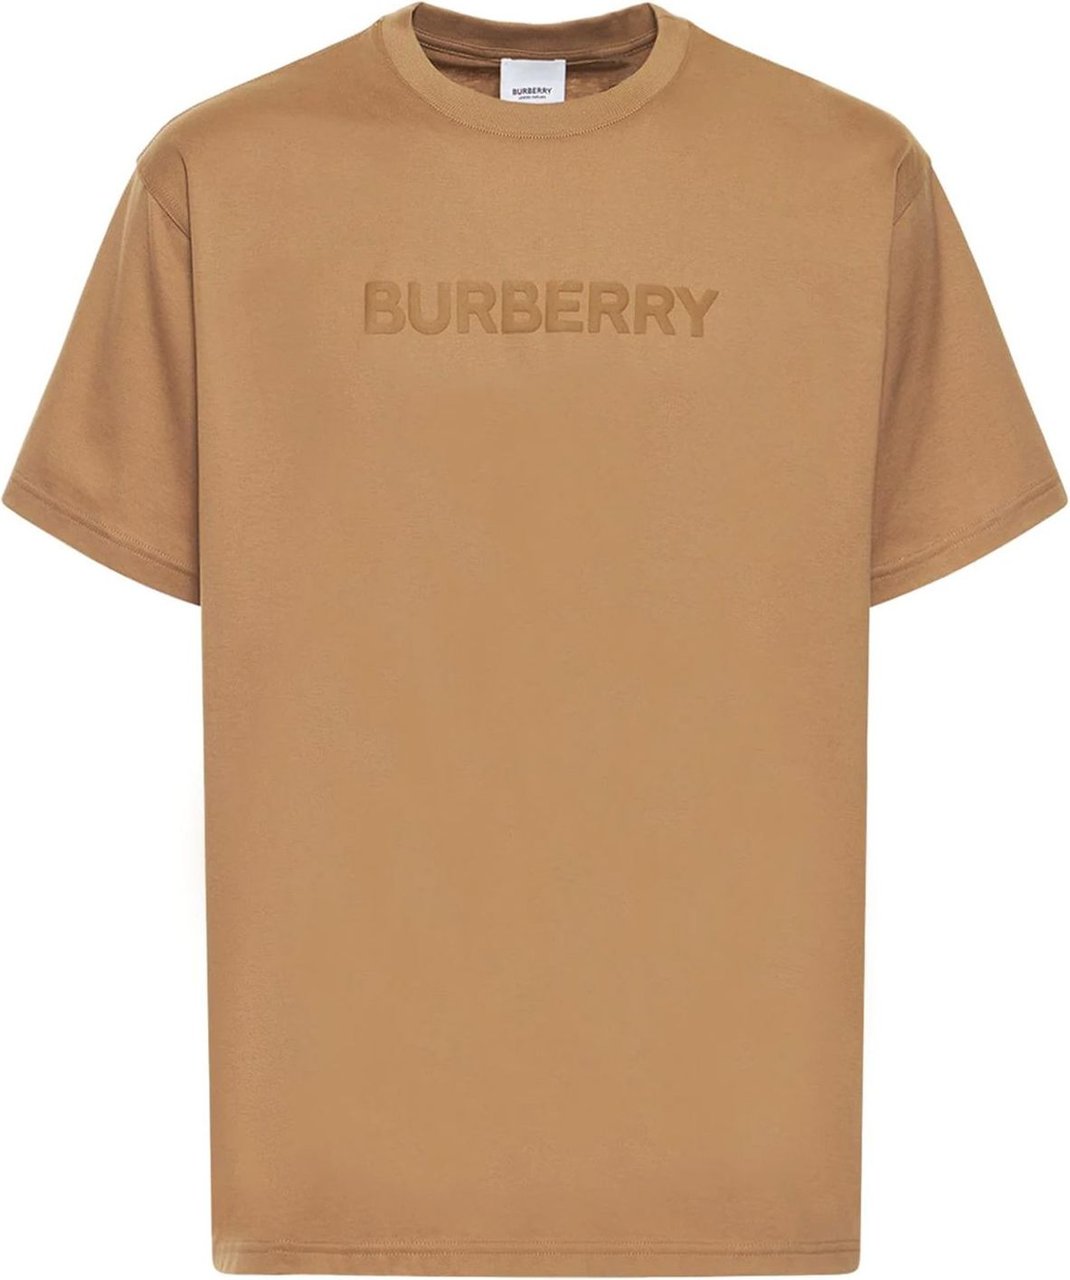 Burberry Cotton t-shirt with logo print. This product contains organic cotton Bruin